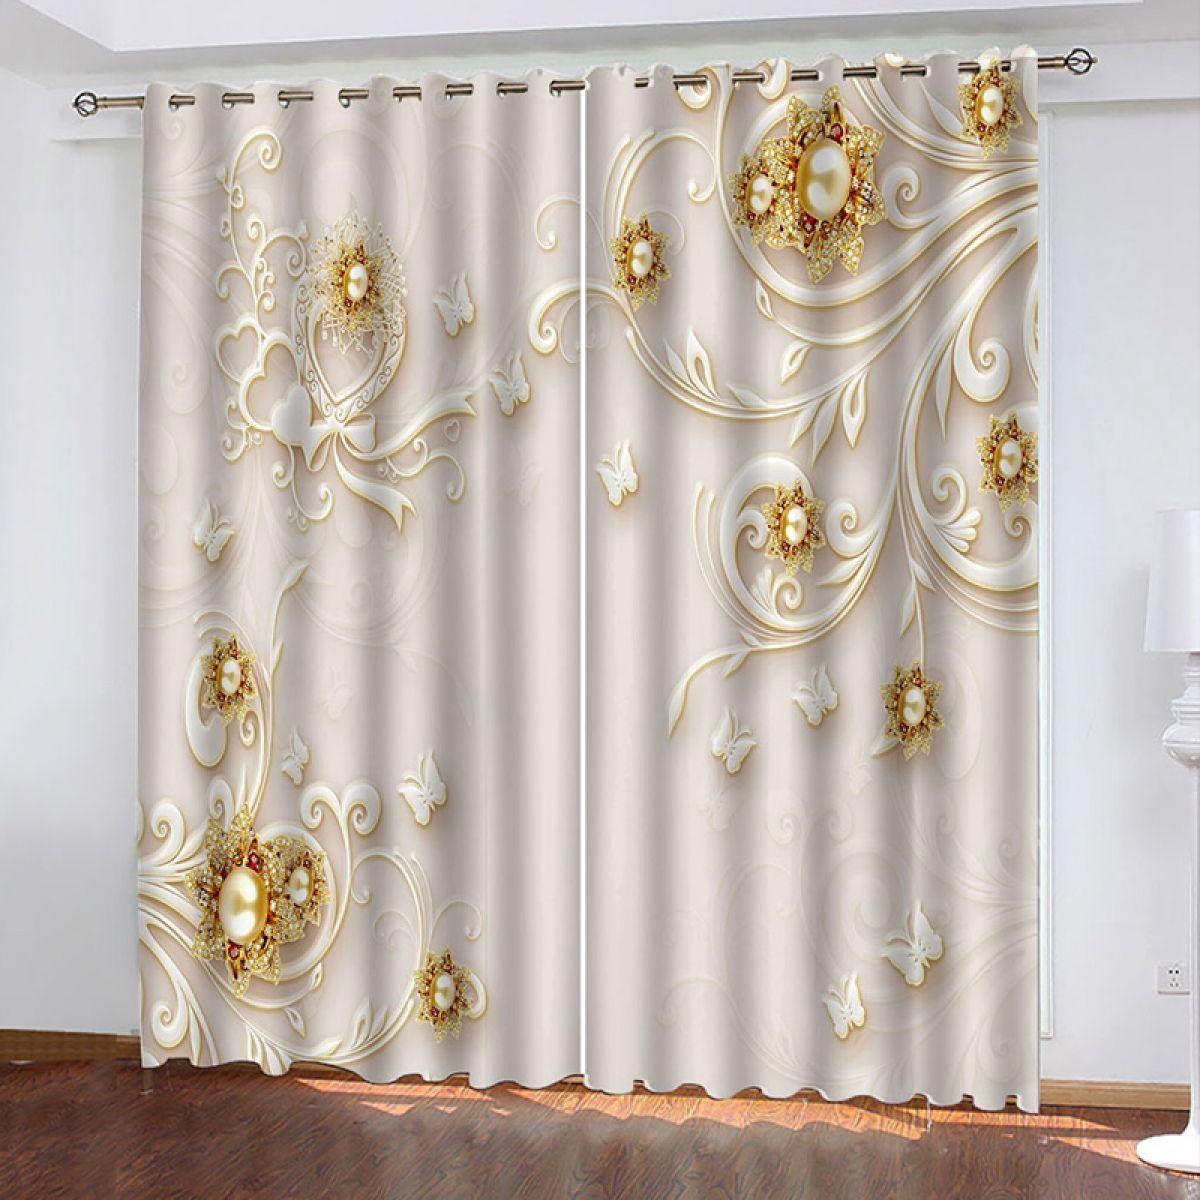 Jewelry Flowers And Carved Butterflies Printed Window Curtain Home Decor